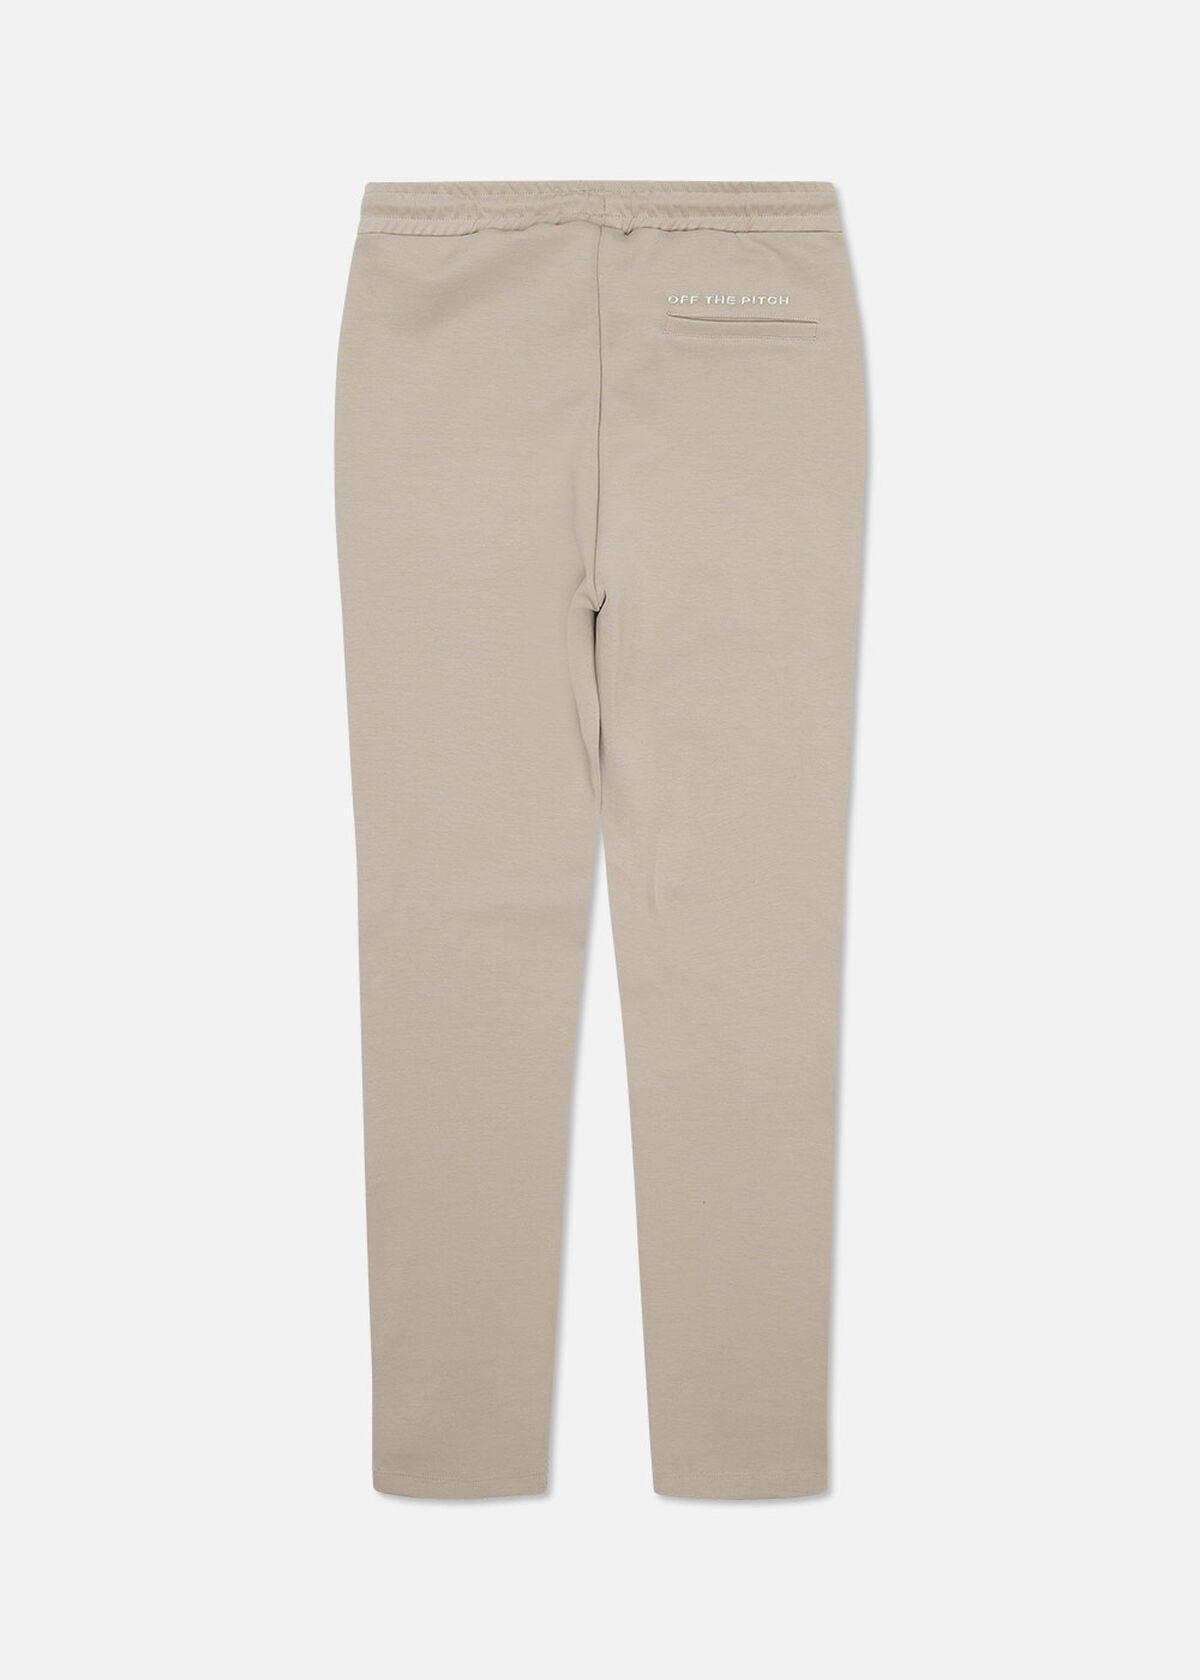 Offset Jogger Woman - 78% Cotton/17% Polyester/5% , Sand, hi-res